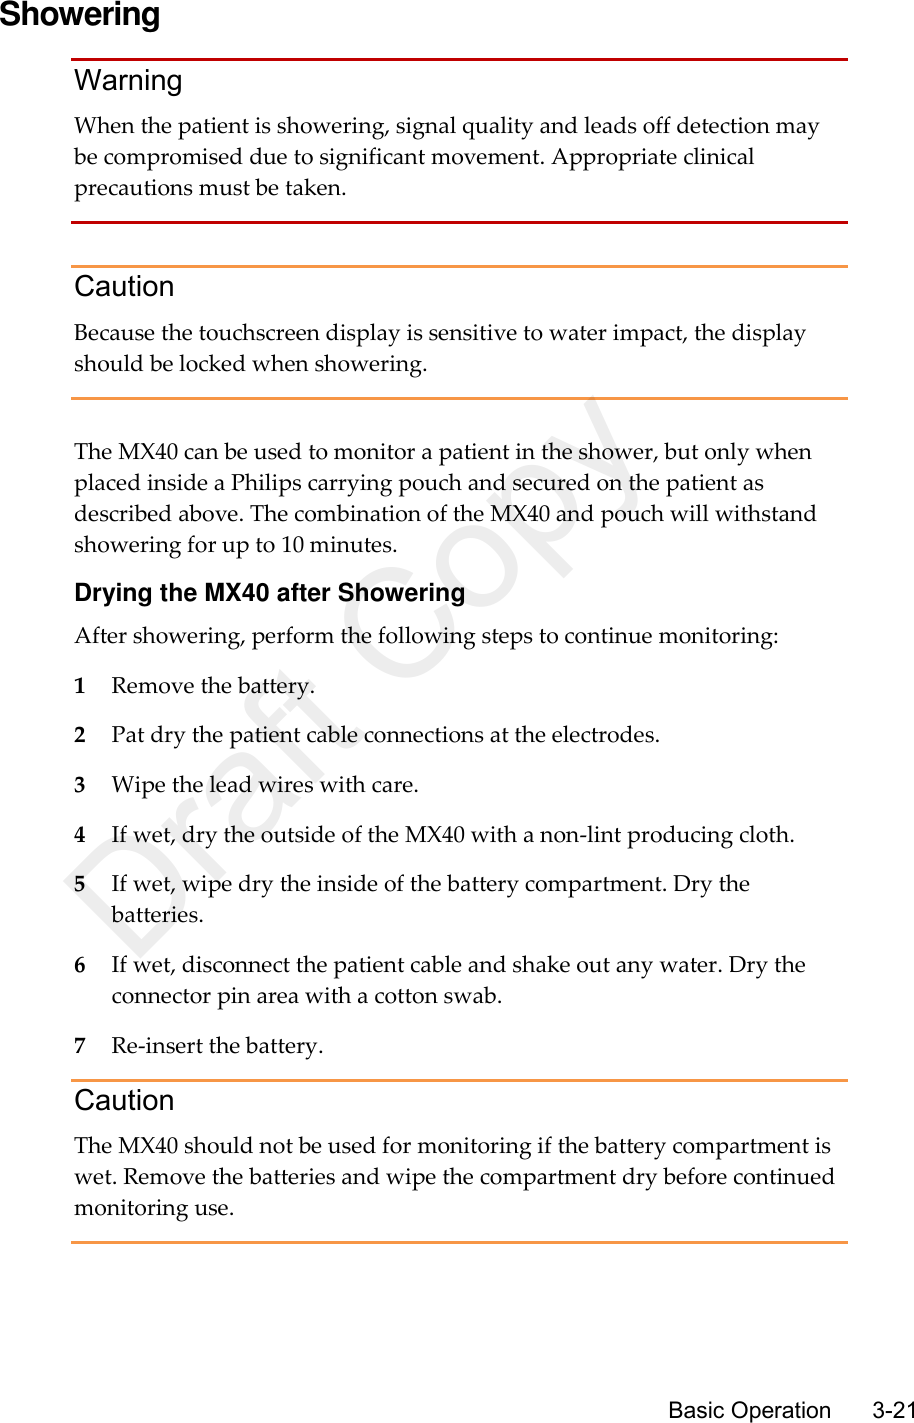      Basic Operation      3-21 Showering Warning When the patient is showering, signal quality and leads off detection may be compromised due to significant movement. Appropriate clinical precautions must be taken.  Caution Because the touchscreen display is sensitive to water impact, the display should be locked when showering.  The MX40 can be used to monitor a patient in the shower, but only when placed inside a Philips carrying pouch and secured on the patient as described above. The combination of the MX40 and pouch will withstand showering for up to 10 minutes. Drying the MX40 after Showering After showering, perform the following steps to continue monitoring: 1 Remove the battery. 2 Pat dry the patient cable connections at the electrodes. 3 Wipe the lead wires with care. 4 If wet, dry the outside of the MX40 with a non-lint producing cloth. 5 If wet, wipe dry the inside of the battery compartment. Dry the batteries. 6 If wet, disconnect the patient cable and shake out any water. Dry the connector pin area with a cotton swab. 7 Re-insert the battery. Caution The MX40 should not be used for monitoring if the battery compartment is wet. Remove the batteries and wipe the compartment dry before continued monitoring use.  Draft Copy